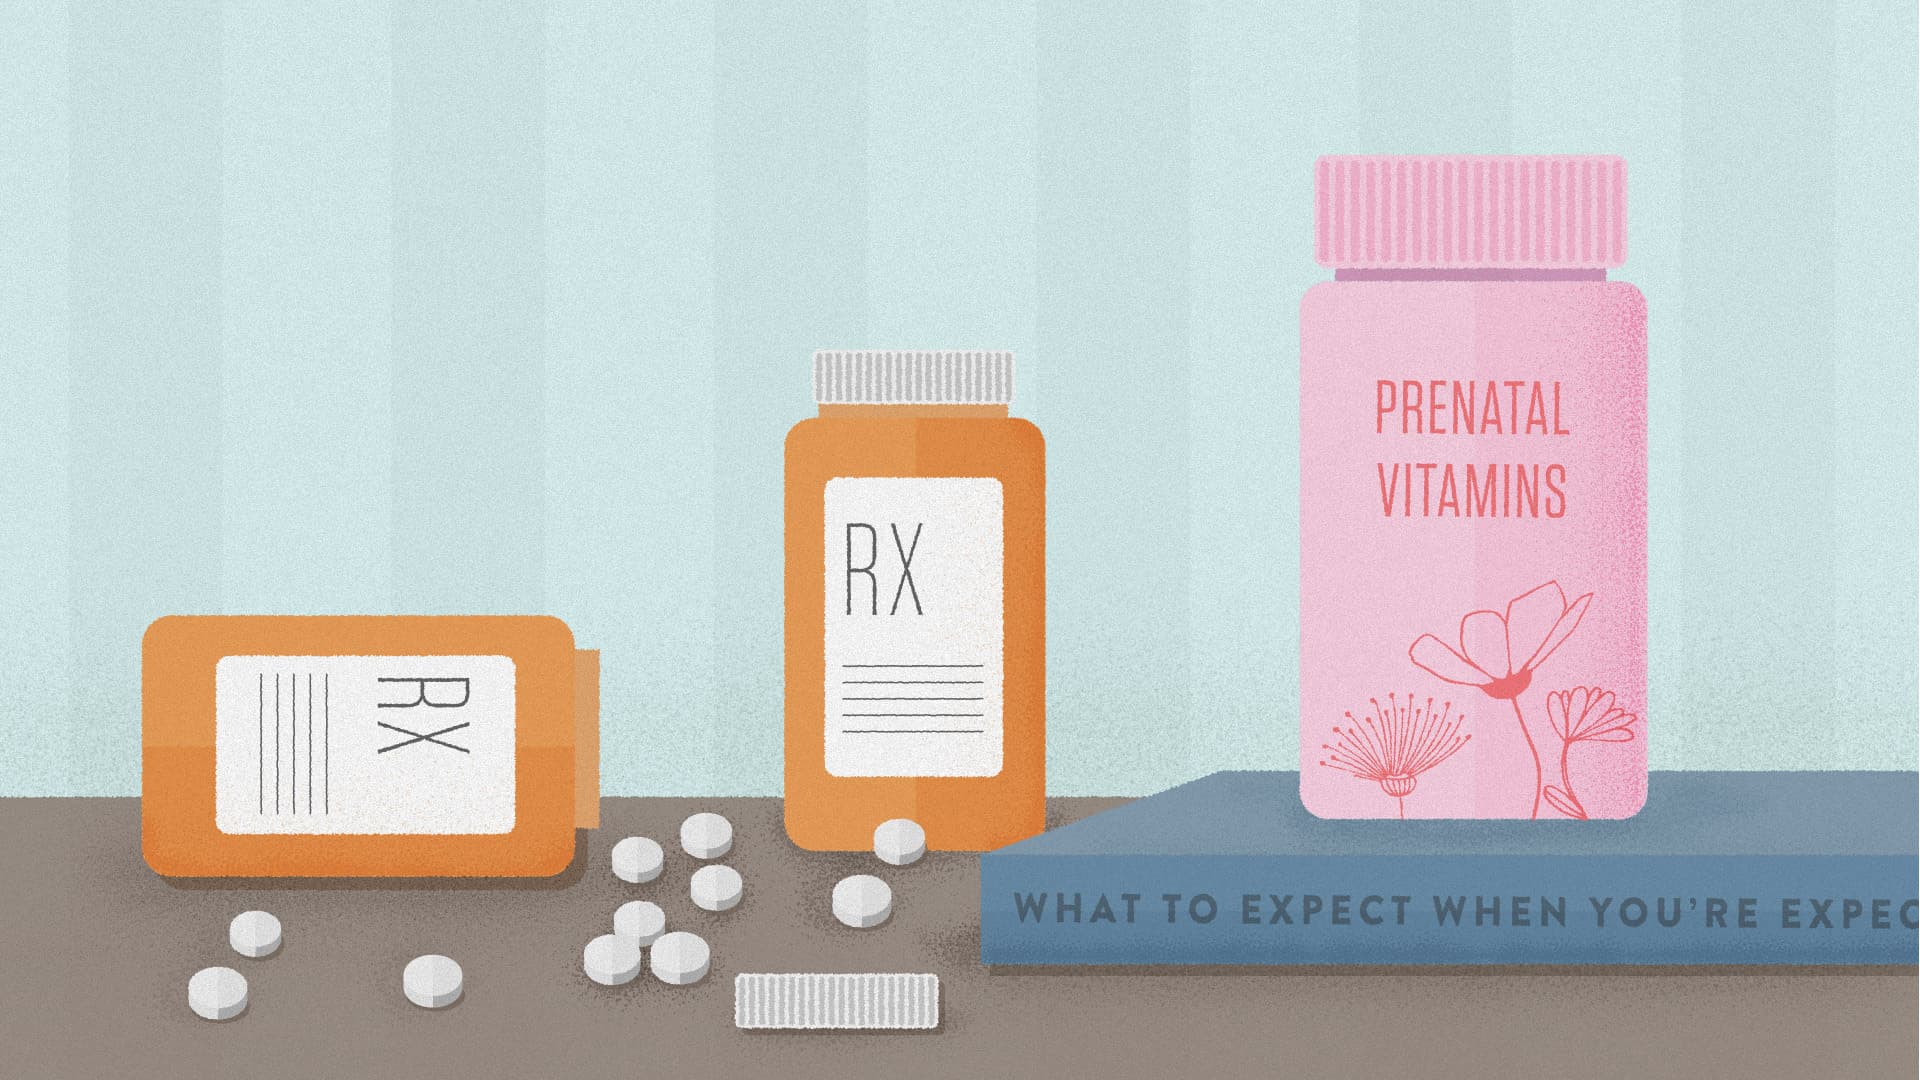 Illustration of a spilled bottle of pills next to a bottle of prenatal vitamins and a book about what to expect when you're expecting